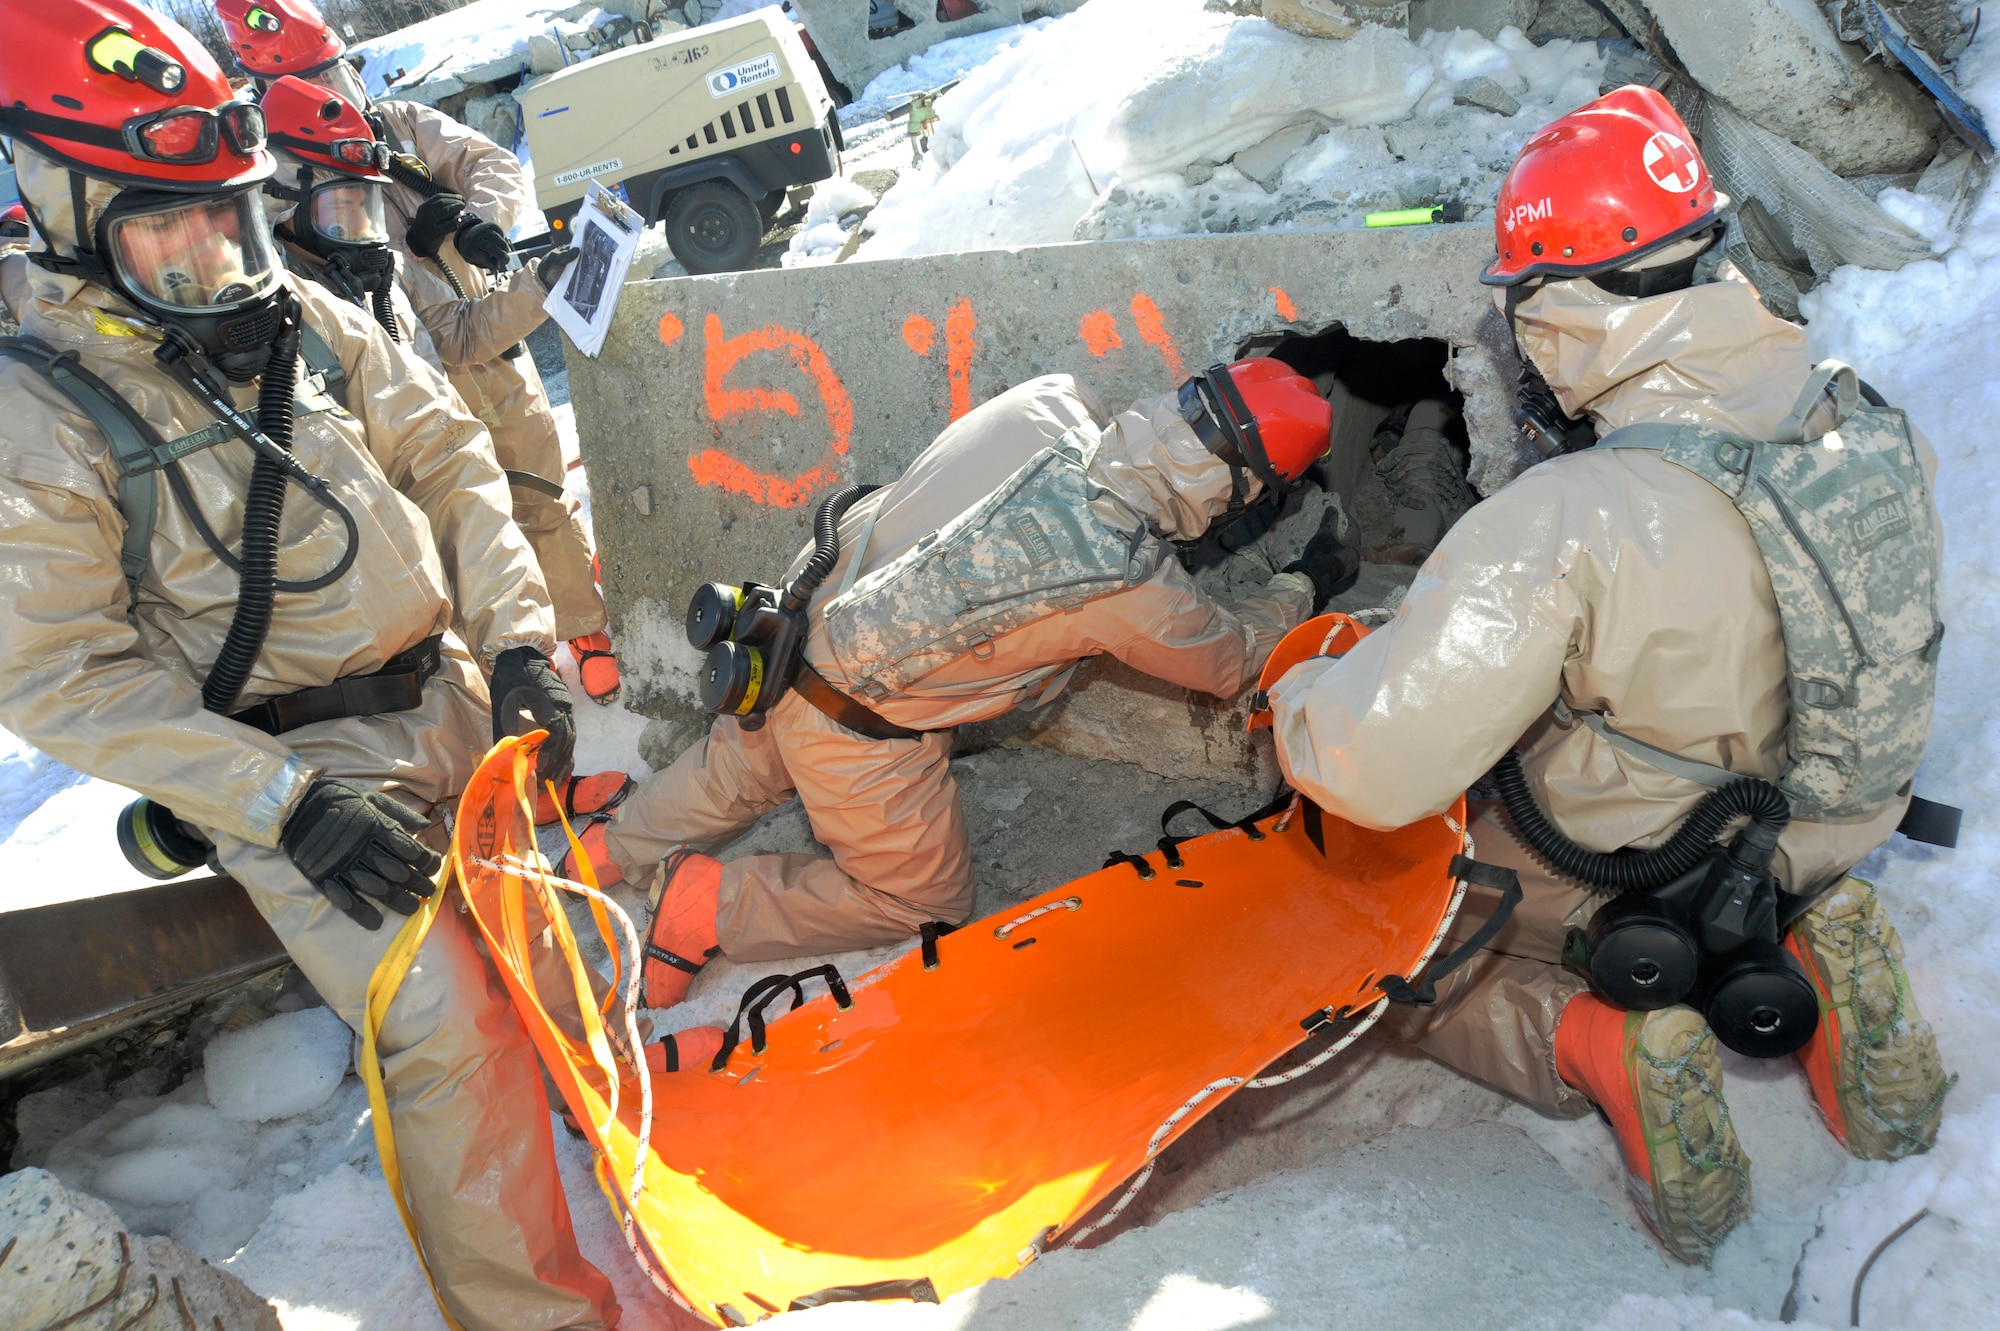 Members of the Oregon National Guard’s CBRNE Enhanced Response Force Package (CERFP), use a drill hammer as they attempt to free a simulated victim during the Vigilant Guard-Alaska 2014 exercise, near Joint Base Elmendorf-Richardson, Anchorage, Alaska, March 29, 2014. (U.S. Air National Guard photo by Tech. Sgt. John Hughel, 142nd Fighter Wing Public Affairs/Released)